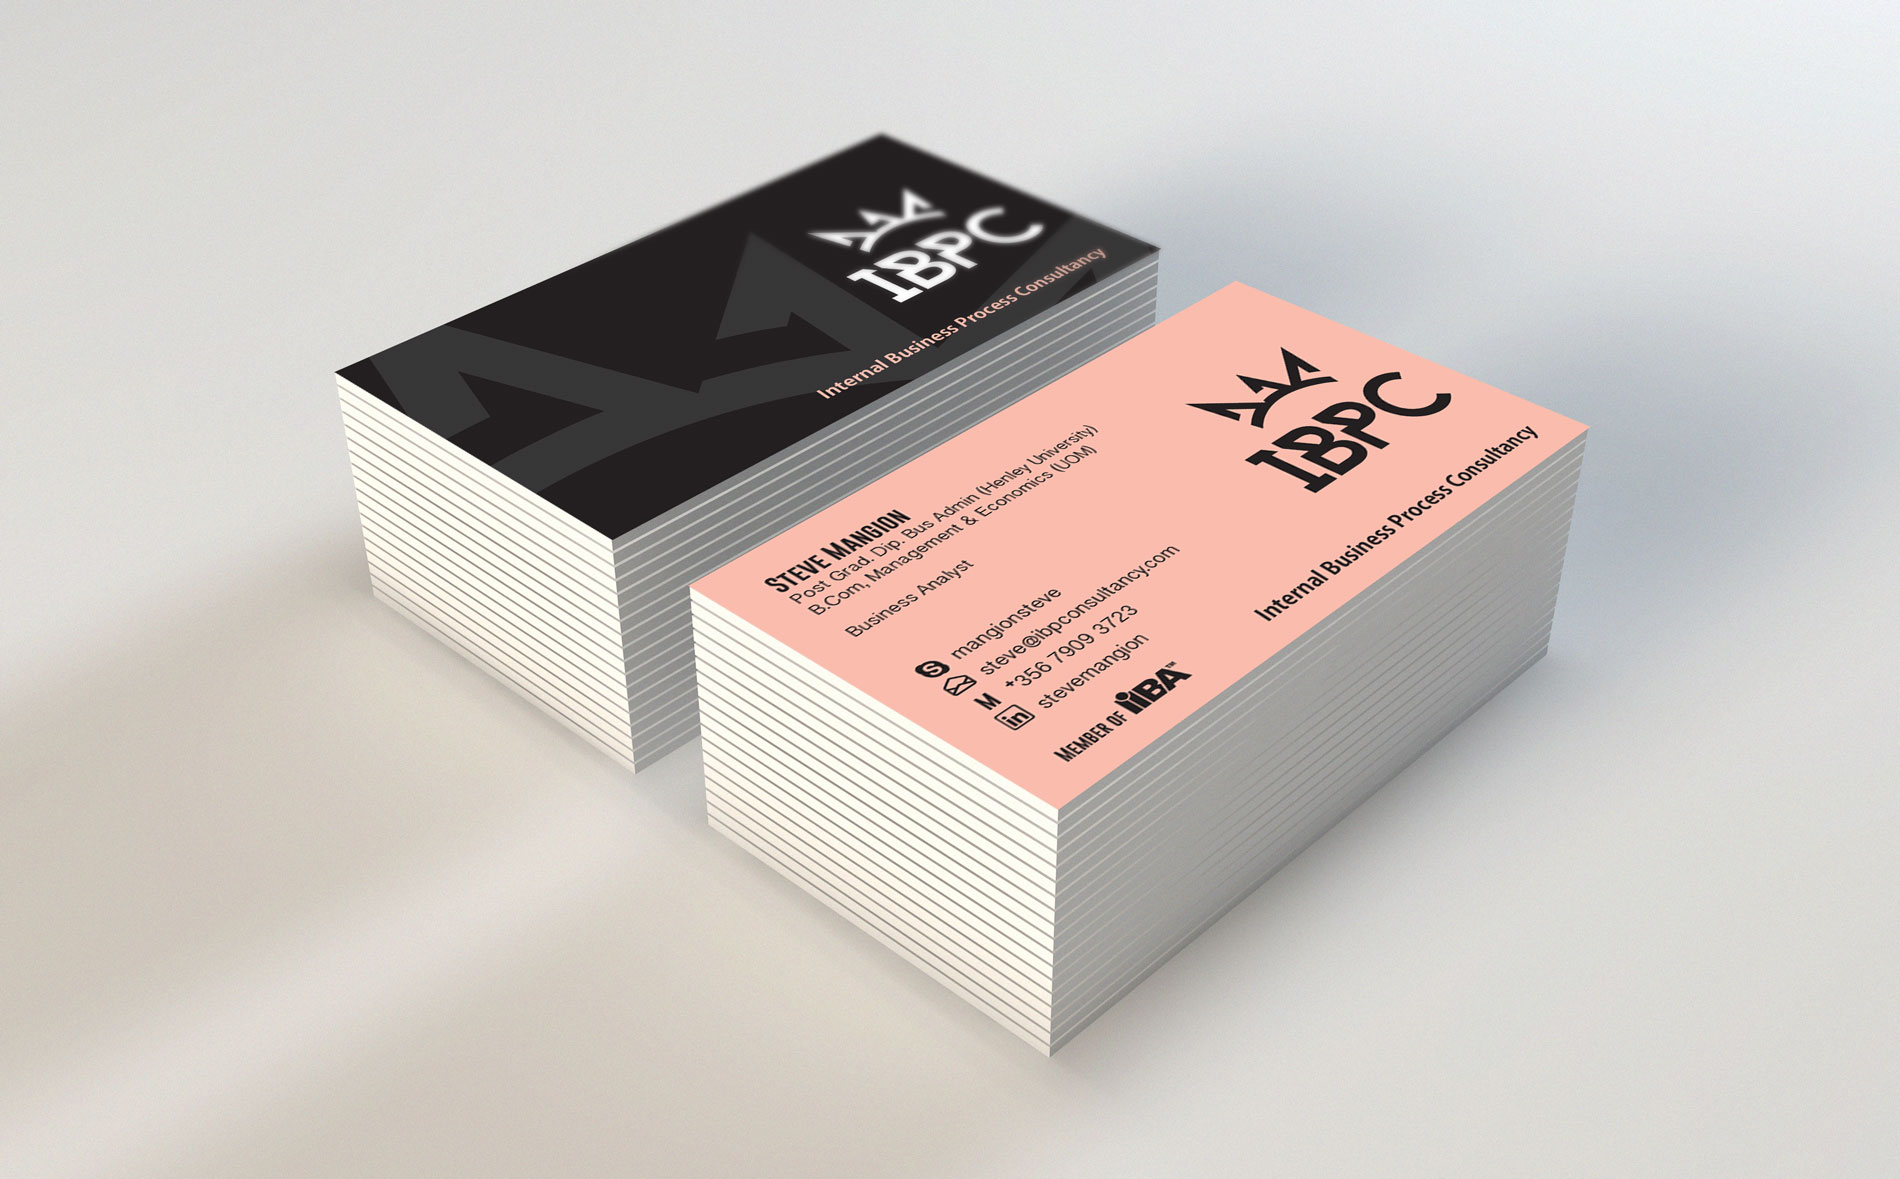 IBPC branding material and business cards